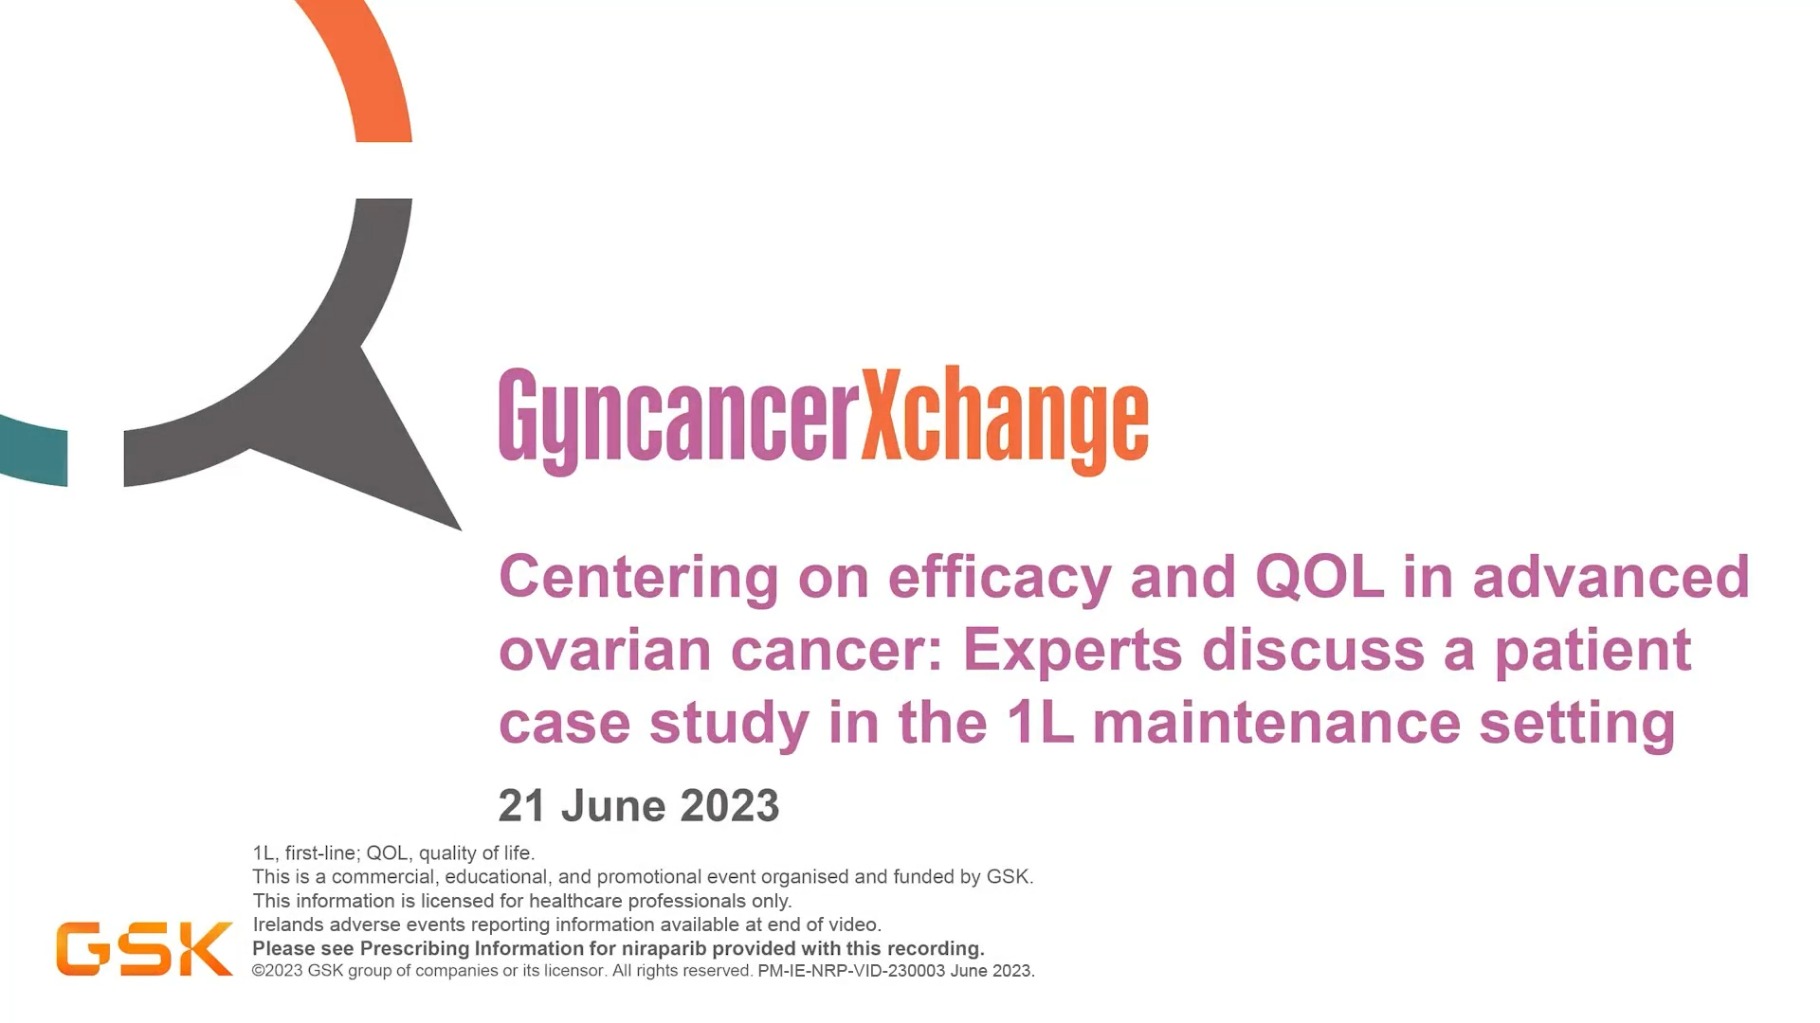 GyncancerXchange Centering on efficacy and QOL in advanced ovarian cancer: Experts discuss a patient case study in the 1L maintenance setting